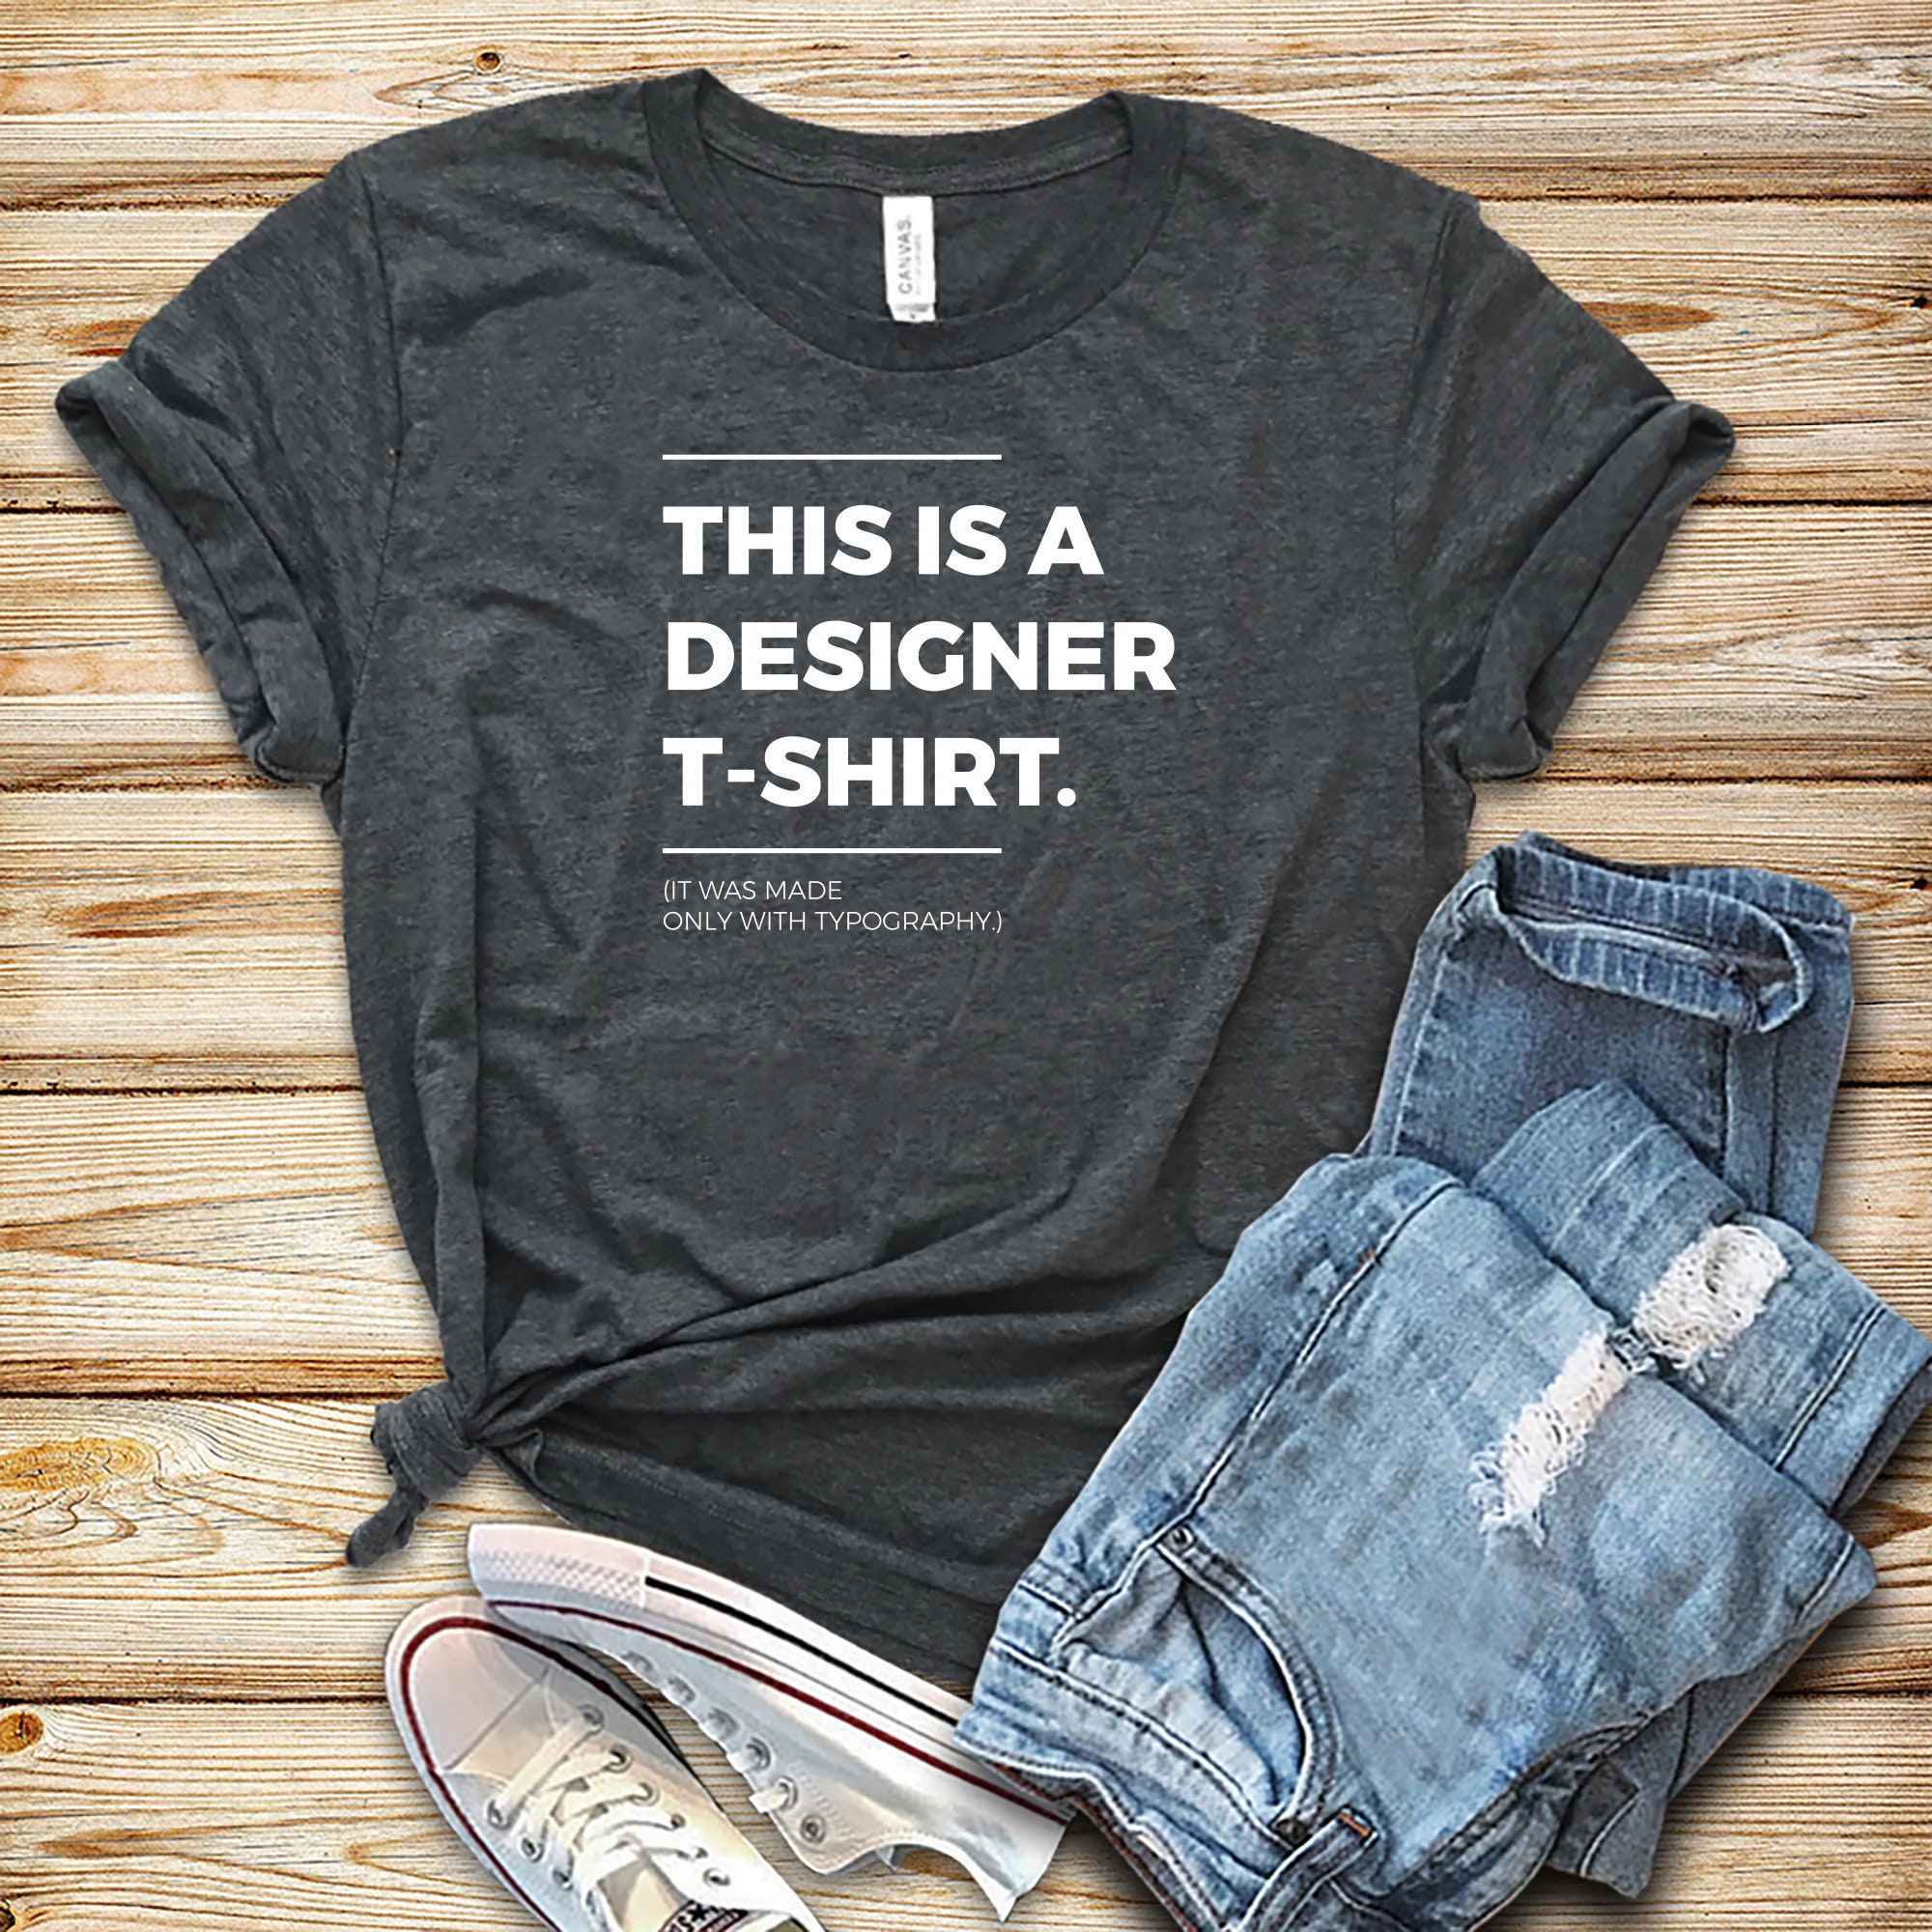 Cheeky Statement Shirt for Designers 